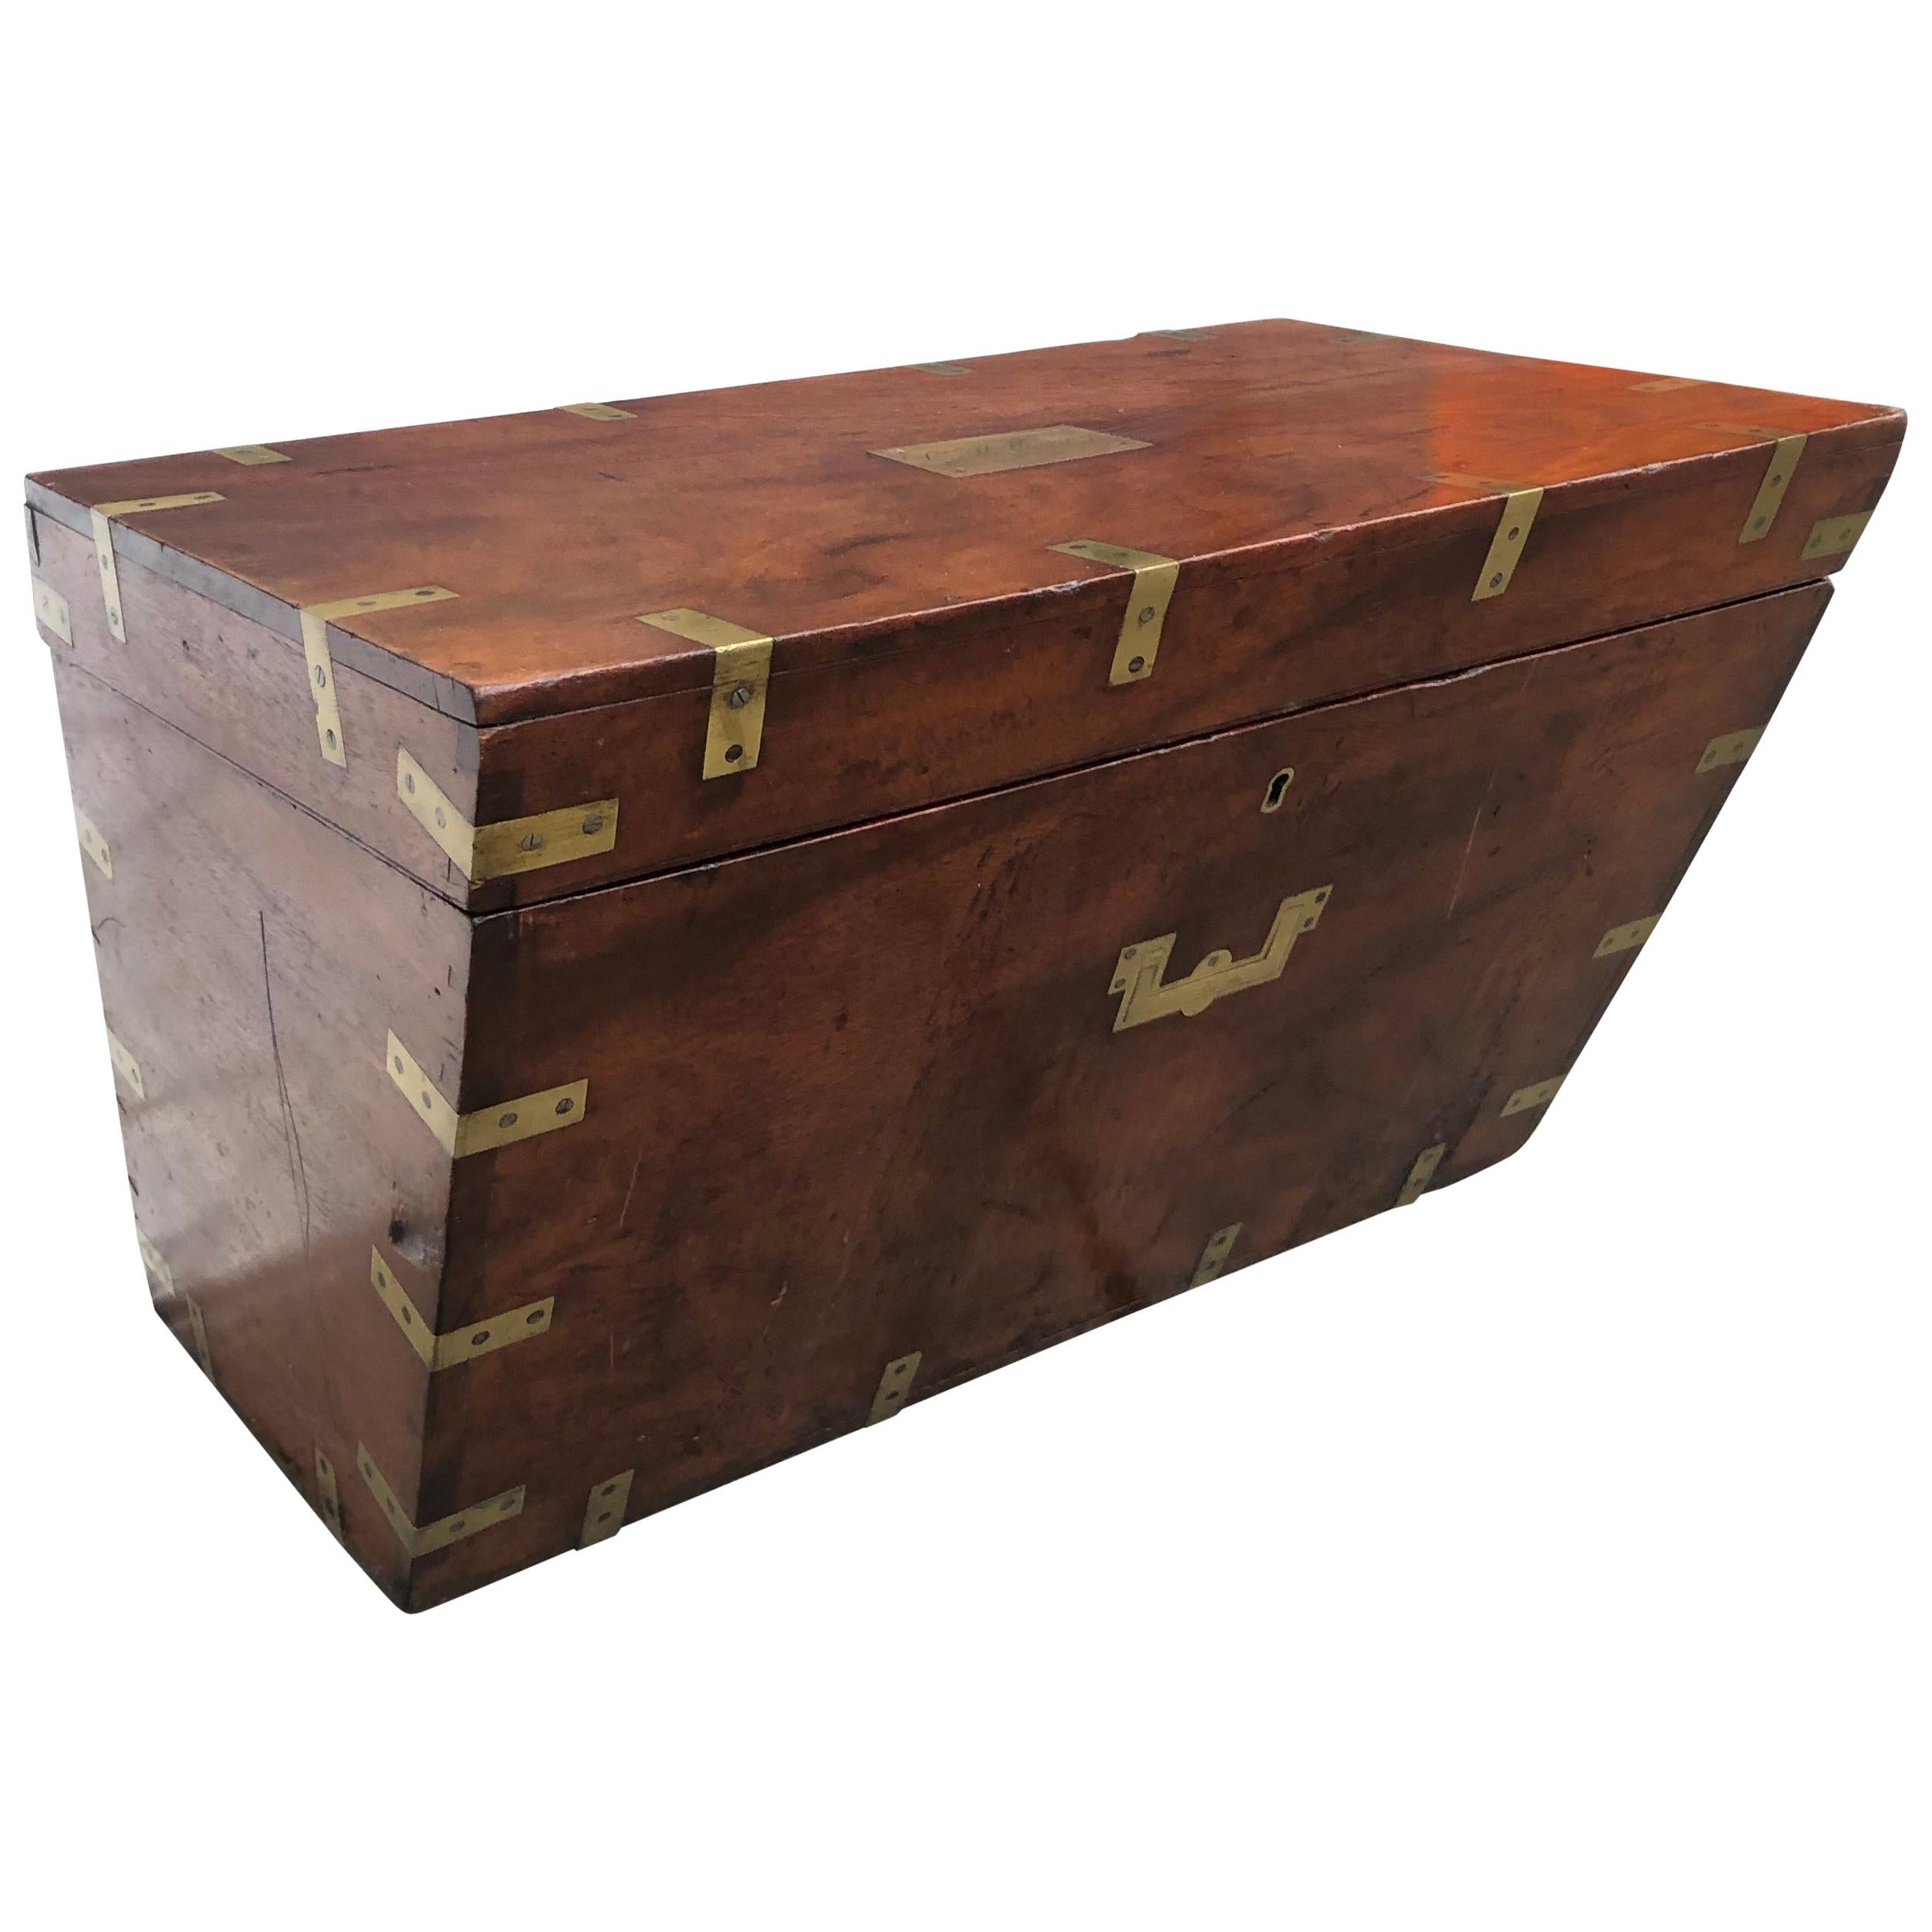 Architecturally Formed Campaign Box with Brass Hardware, Mid-19th Century